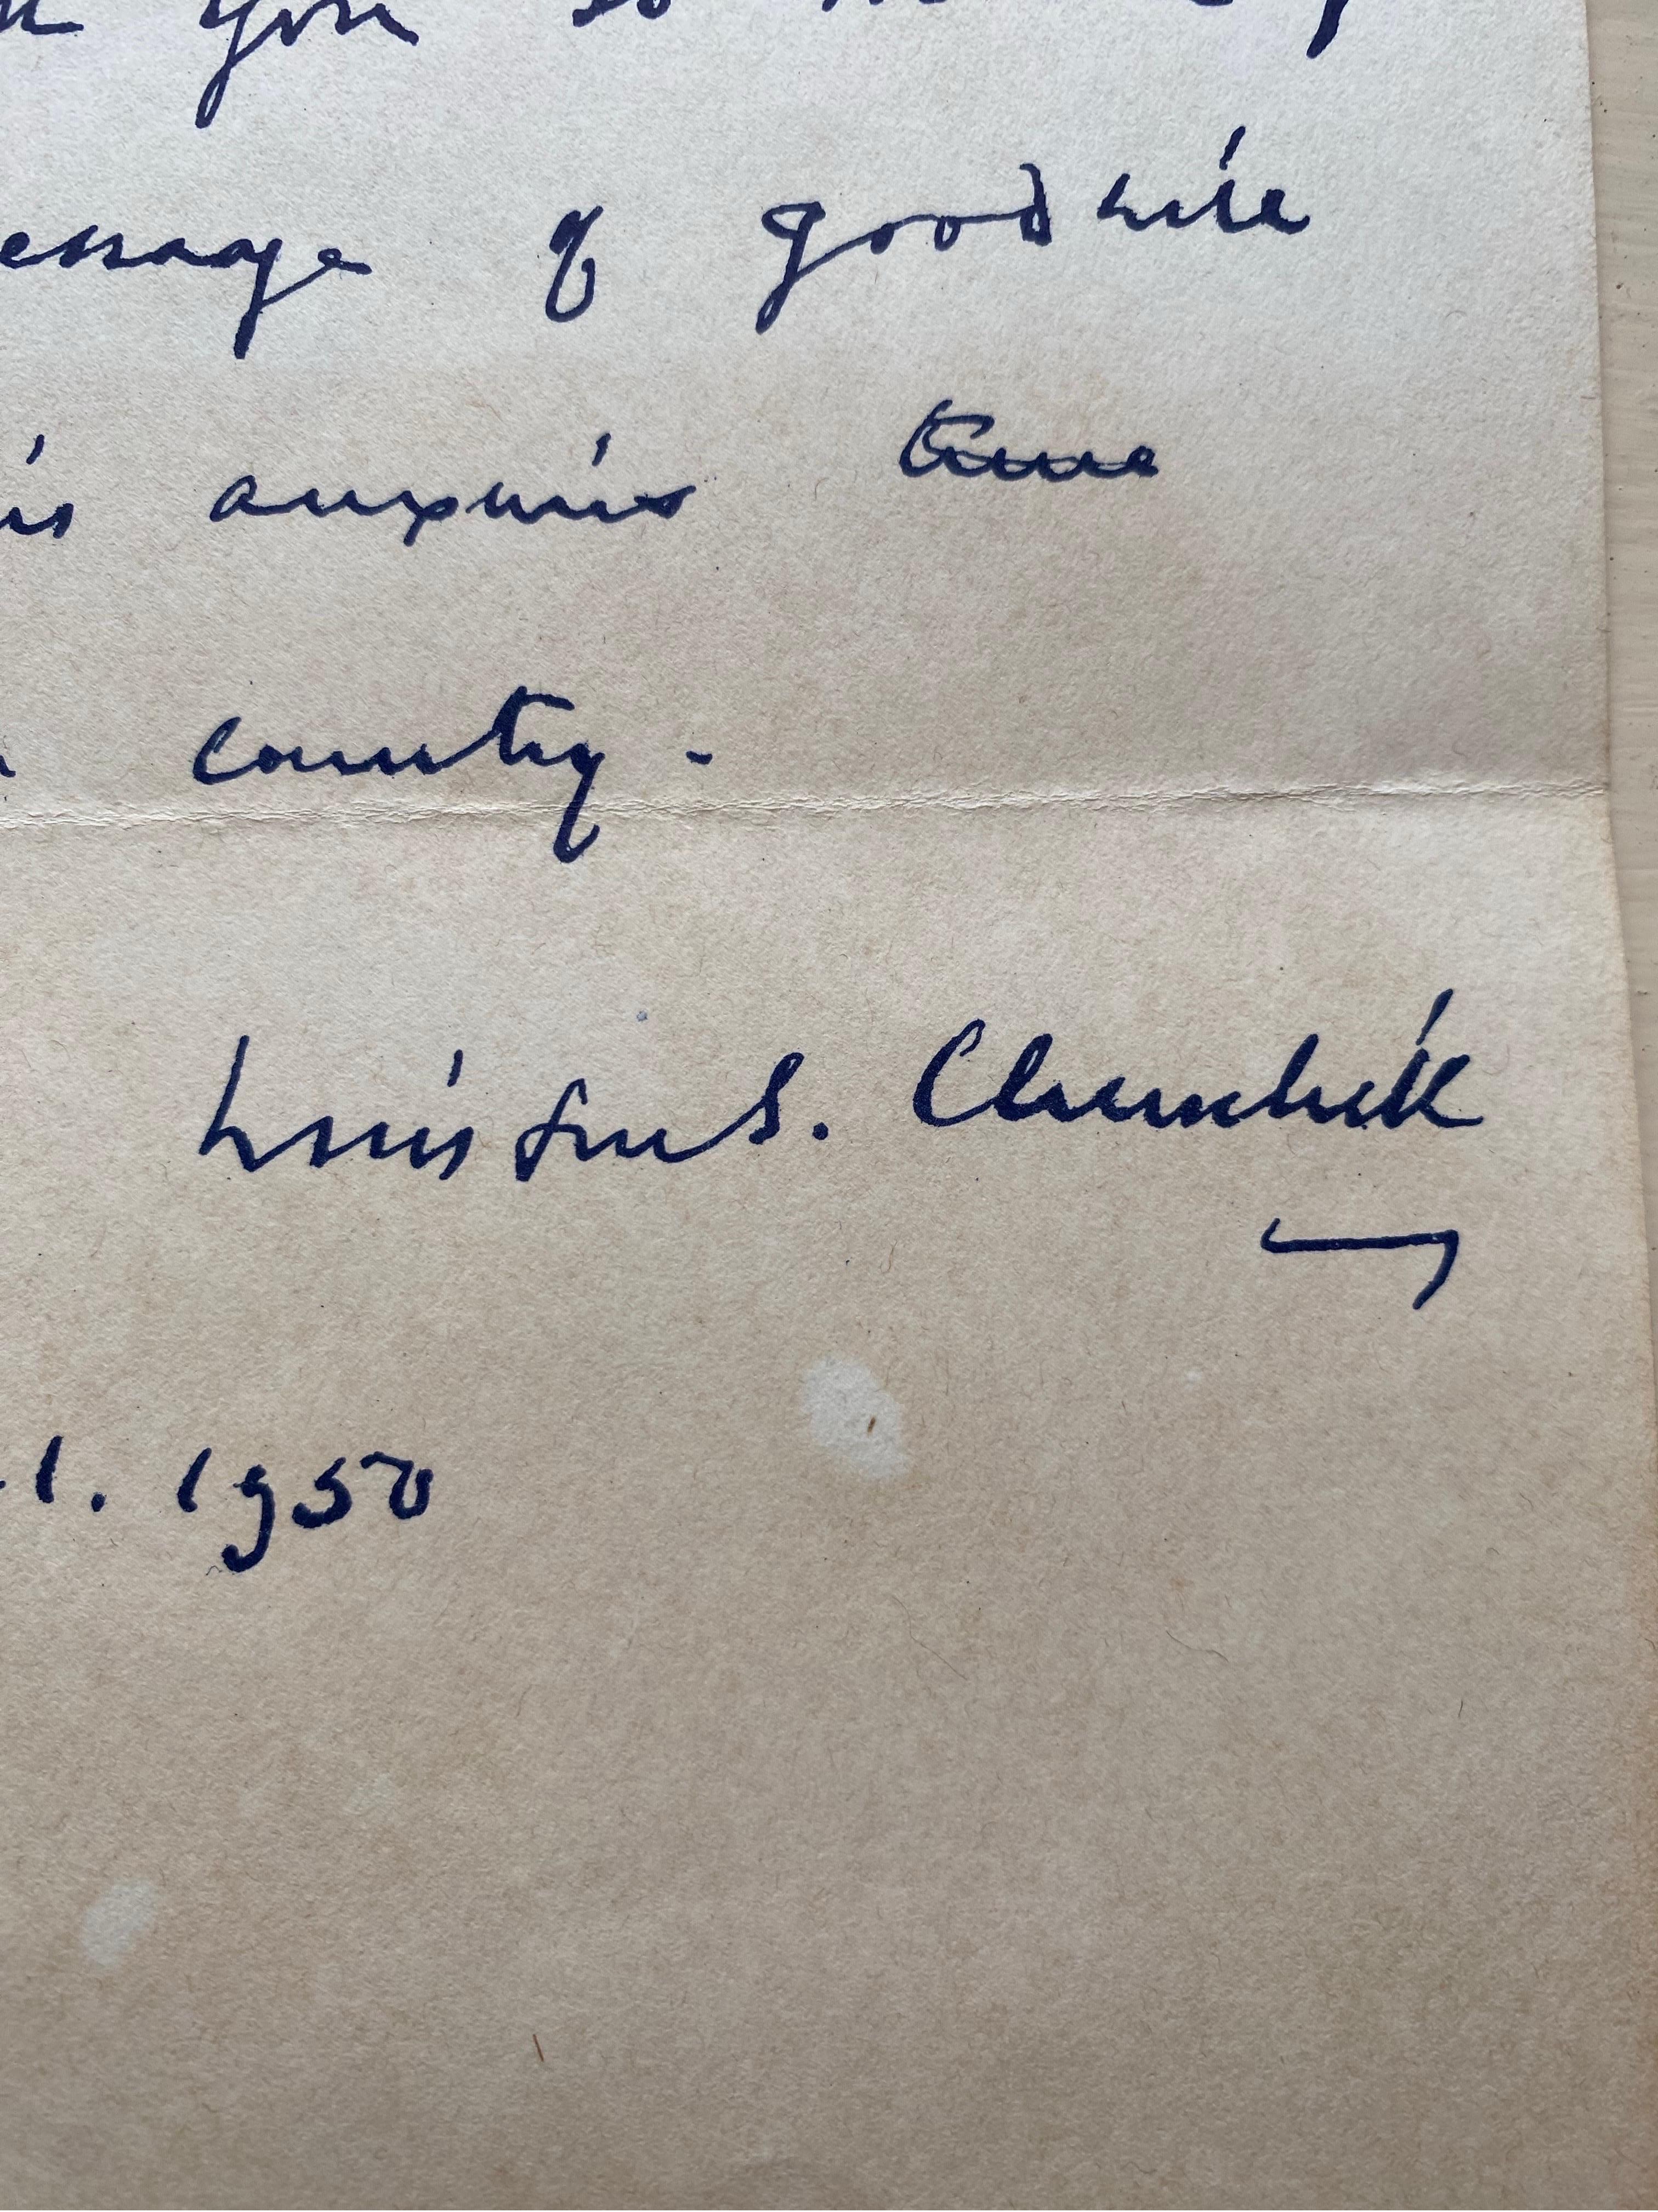 A rare letter signed by Winston Churchill dated March 1950. 

The letter reads:

“Thank you so much for your message of goodwill at this anxious time for our country.”

This letter is no doubt in response to correspondence referring to the general